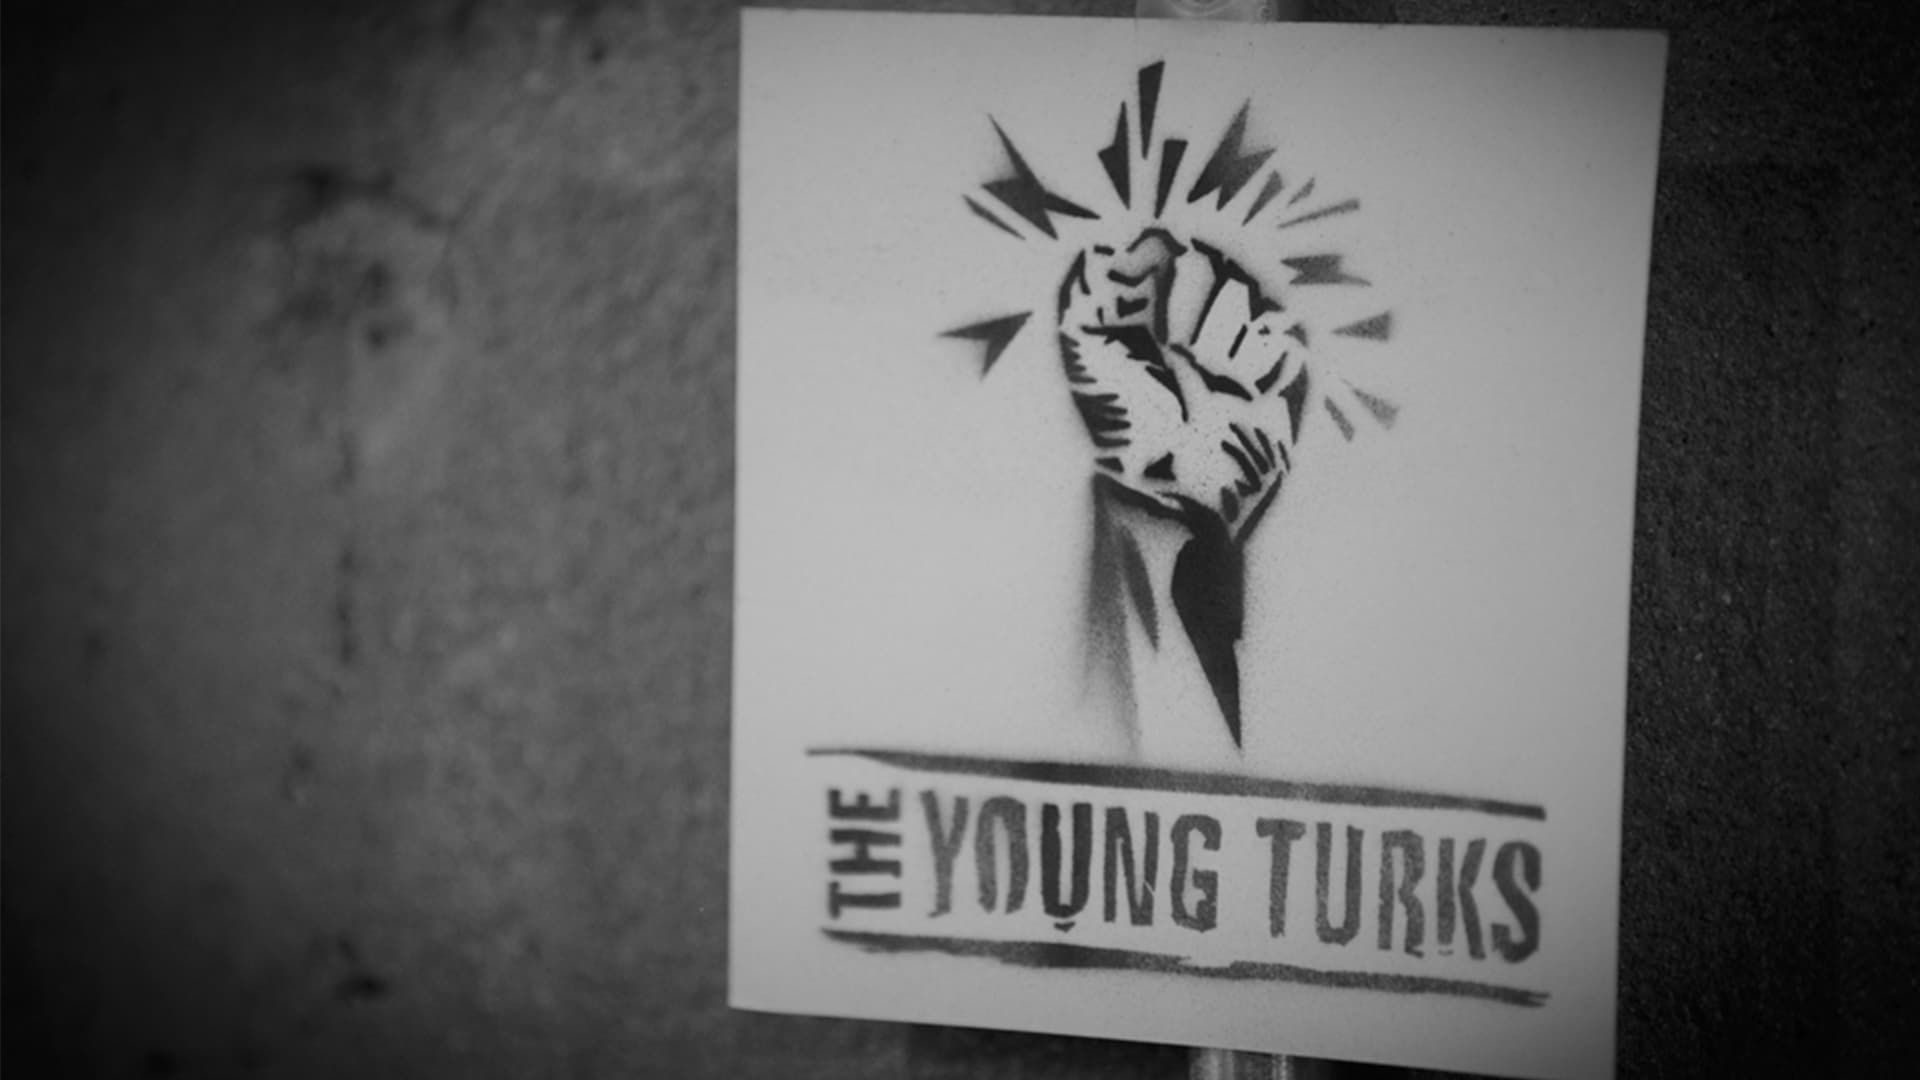 The Young Turks background